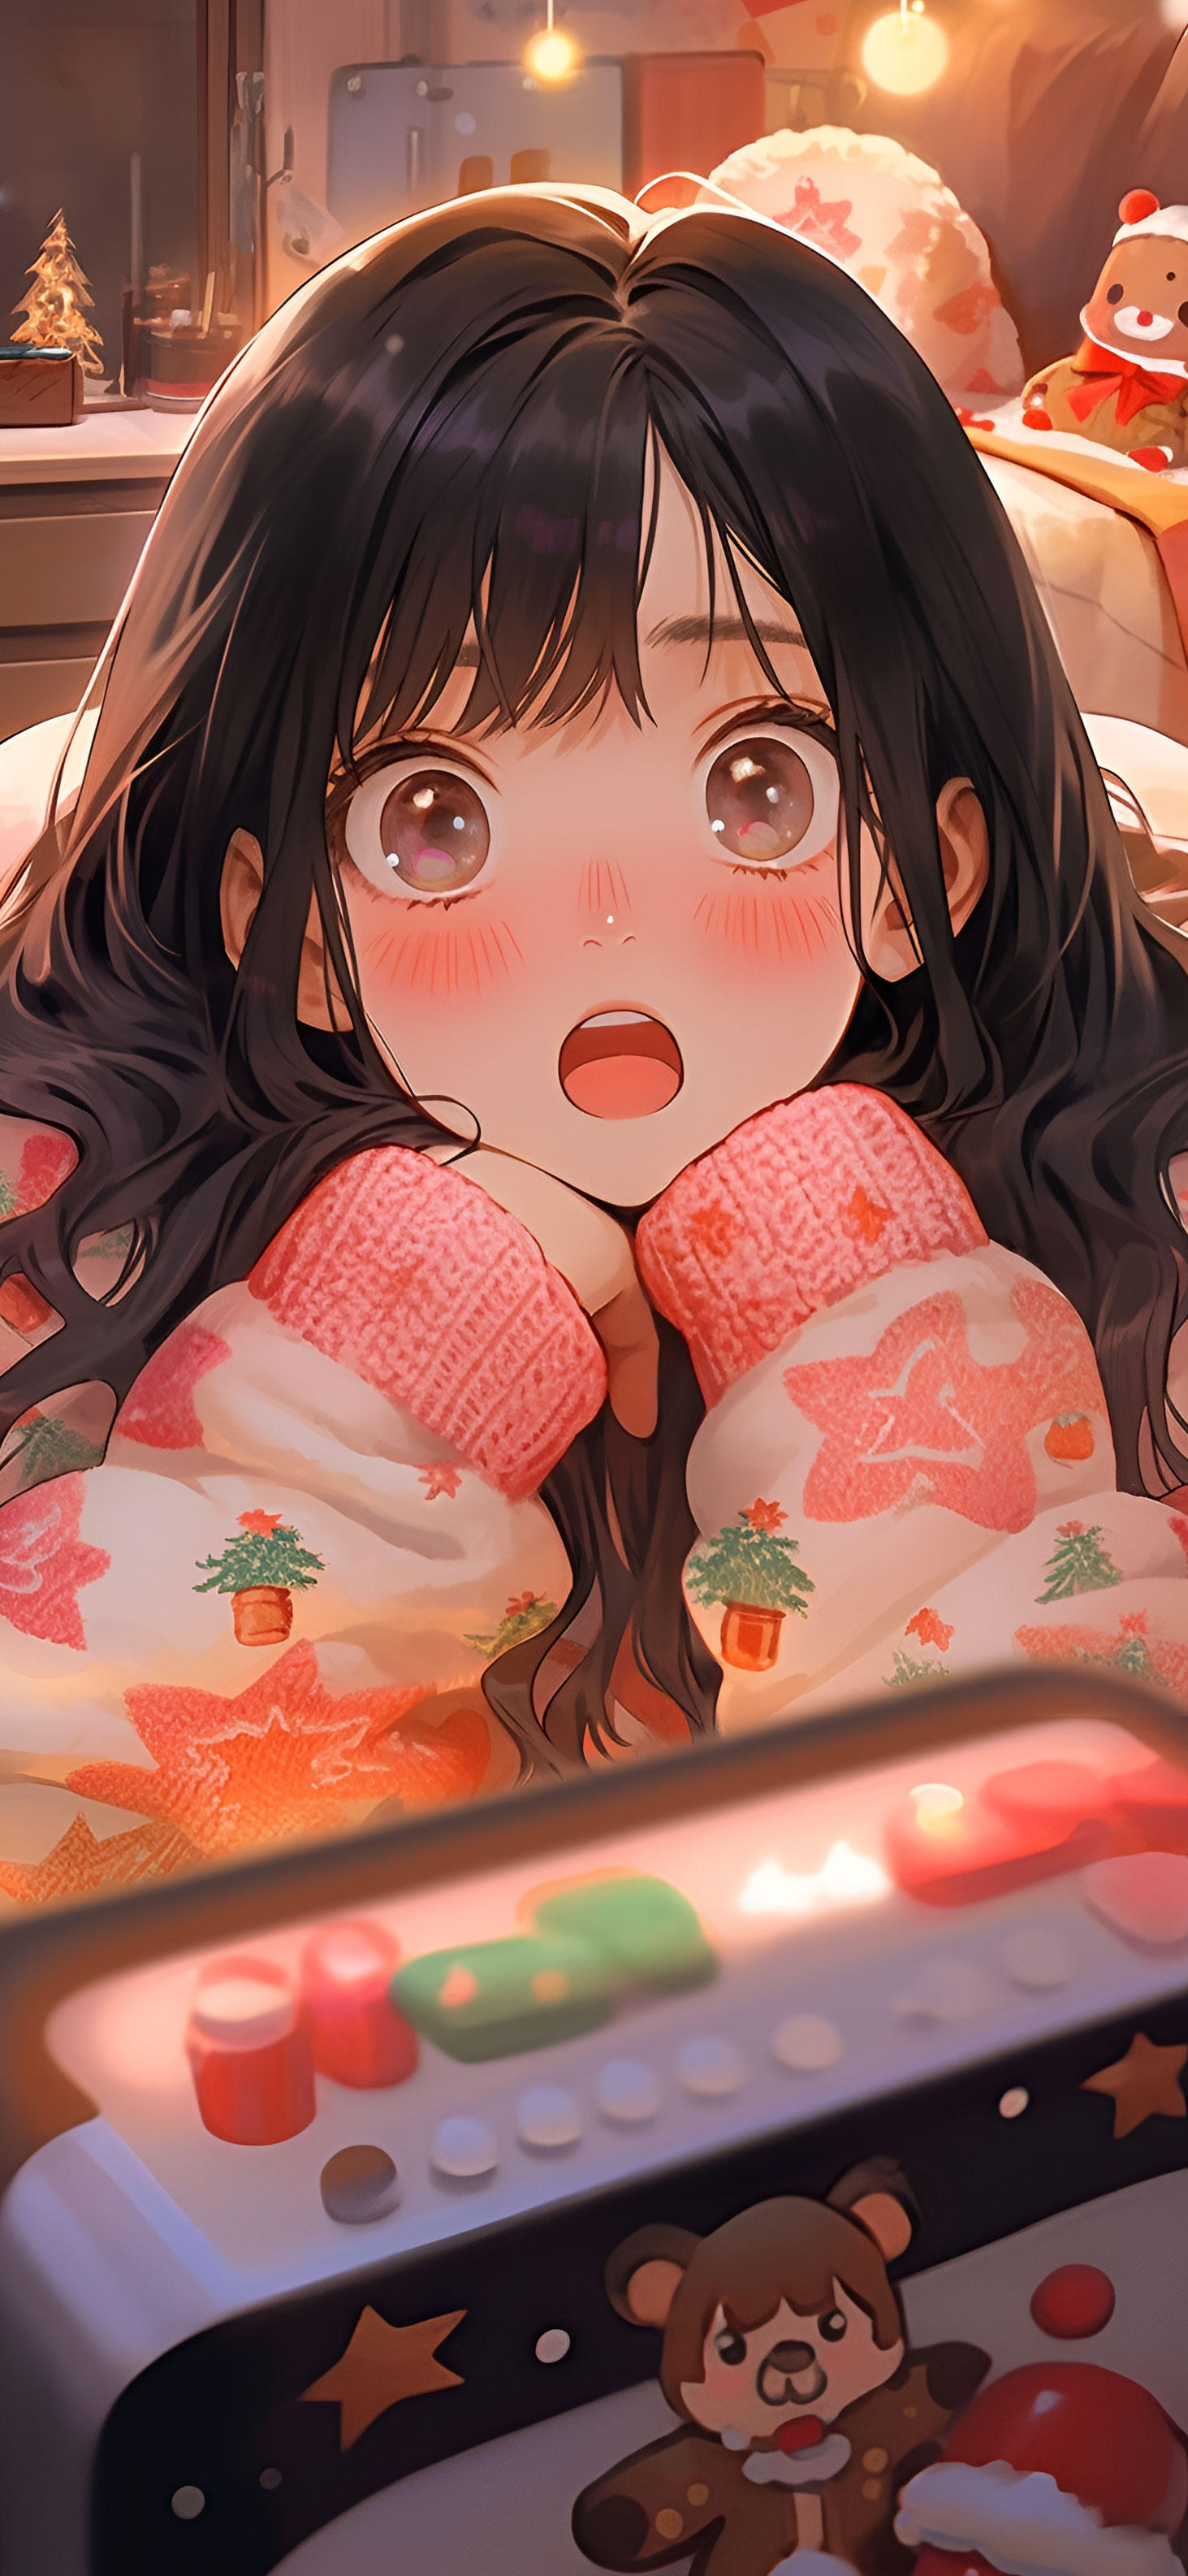 Surprised Anime Girl in Winter Sweater